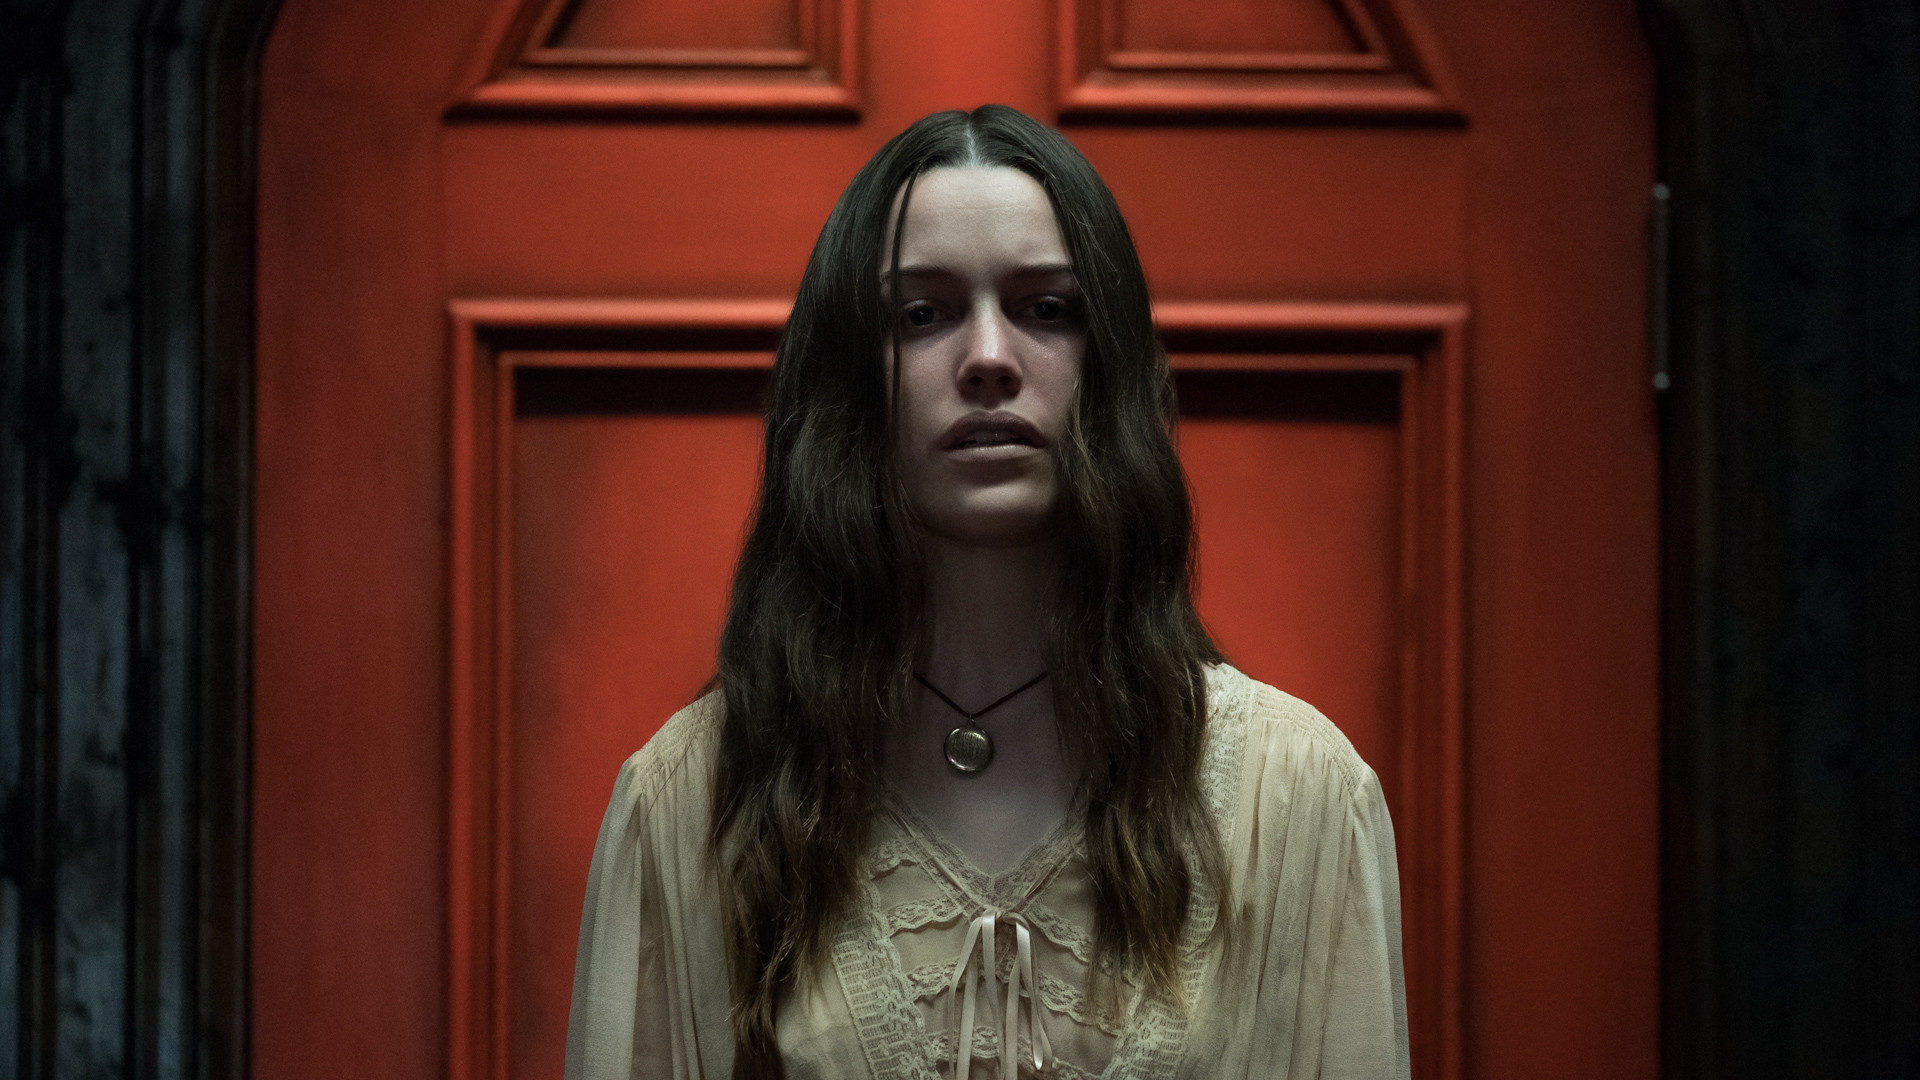 scene from The Haunting of Hill House